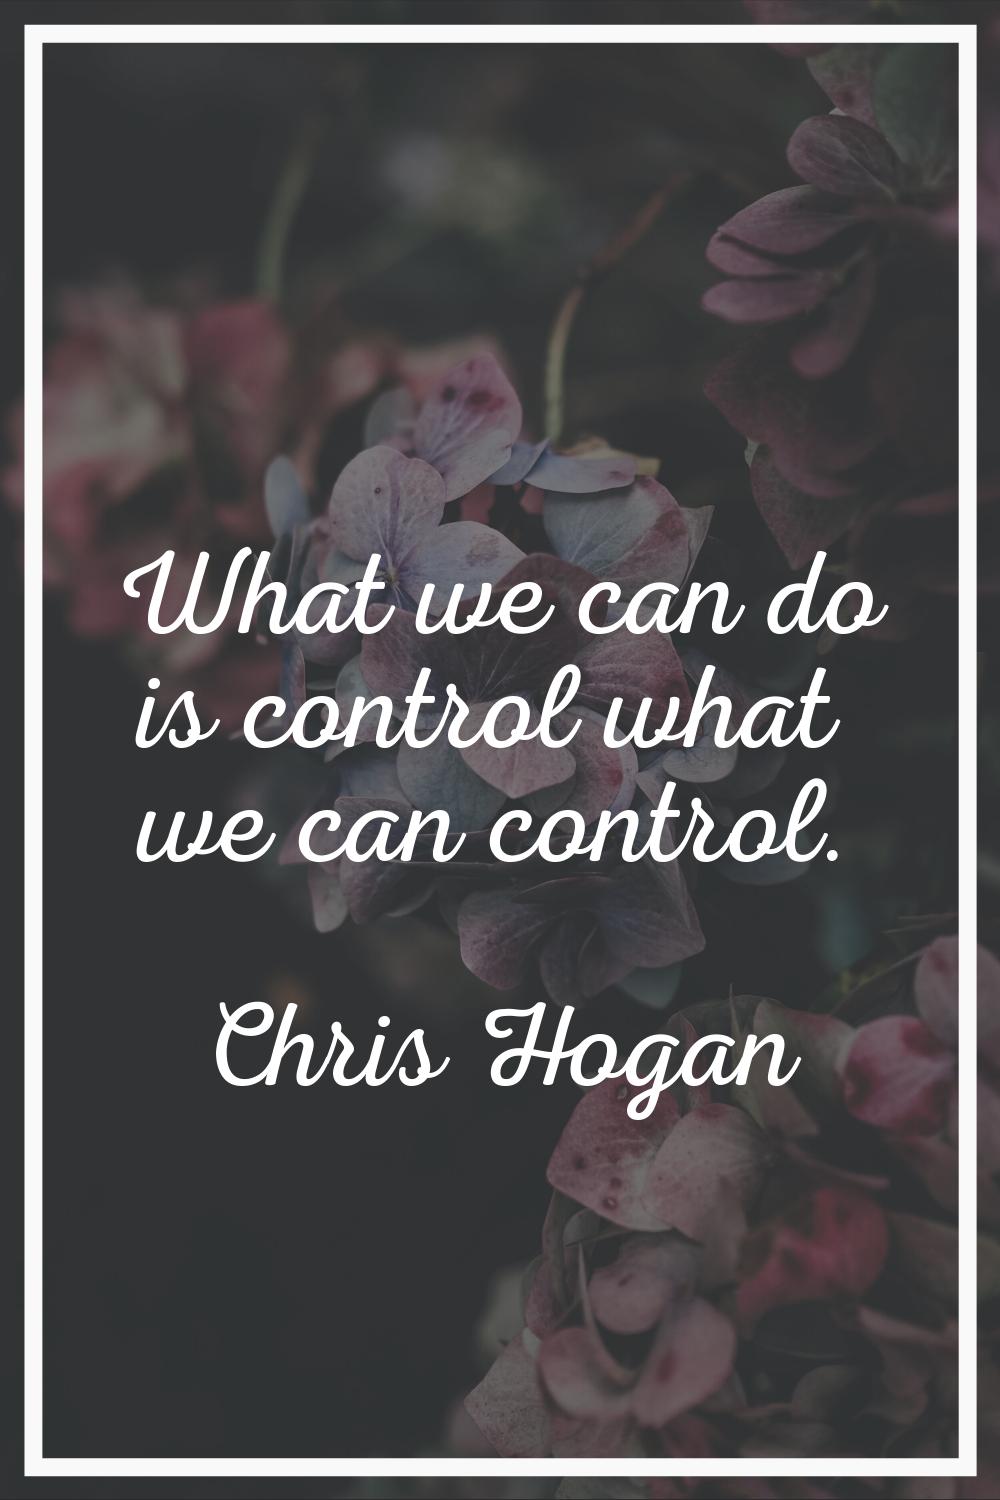 What we can do is control what we can control.